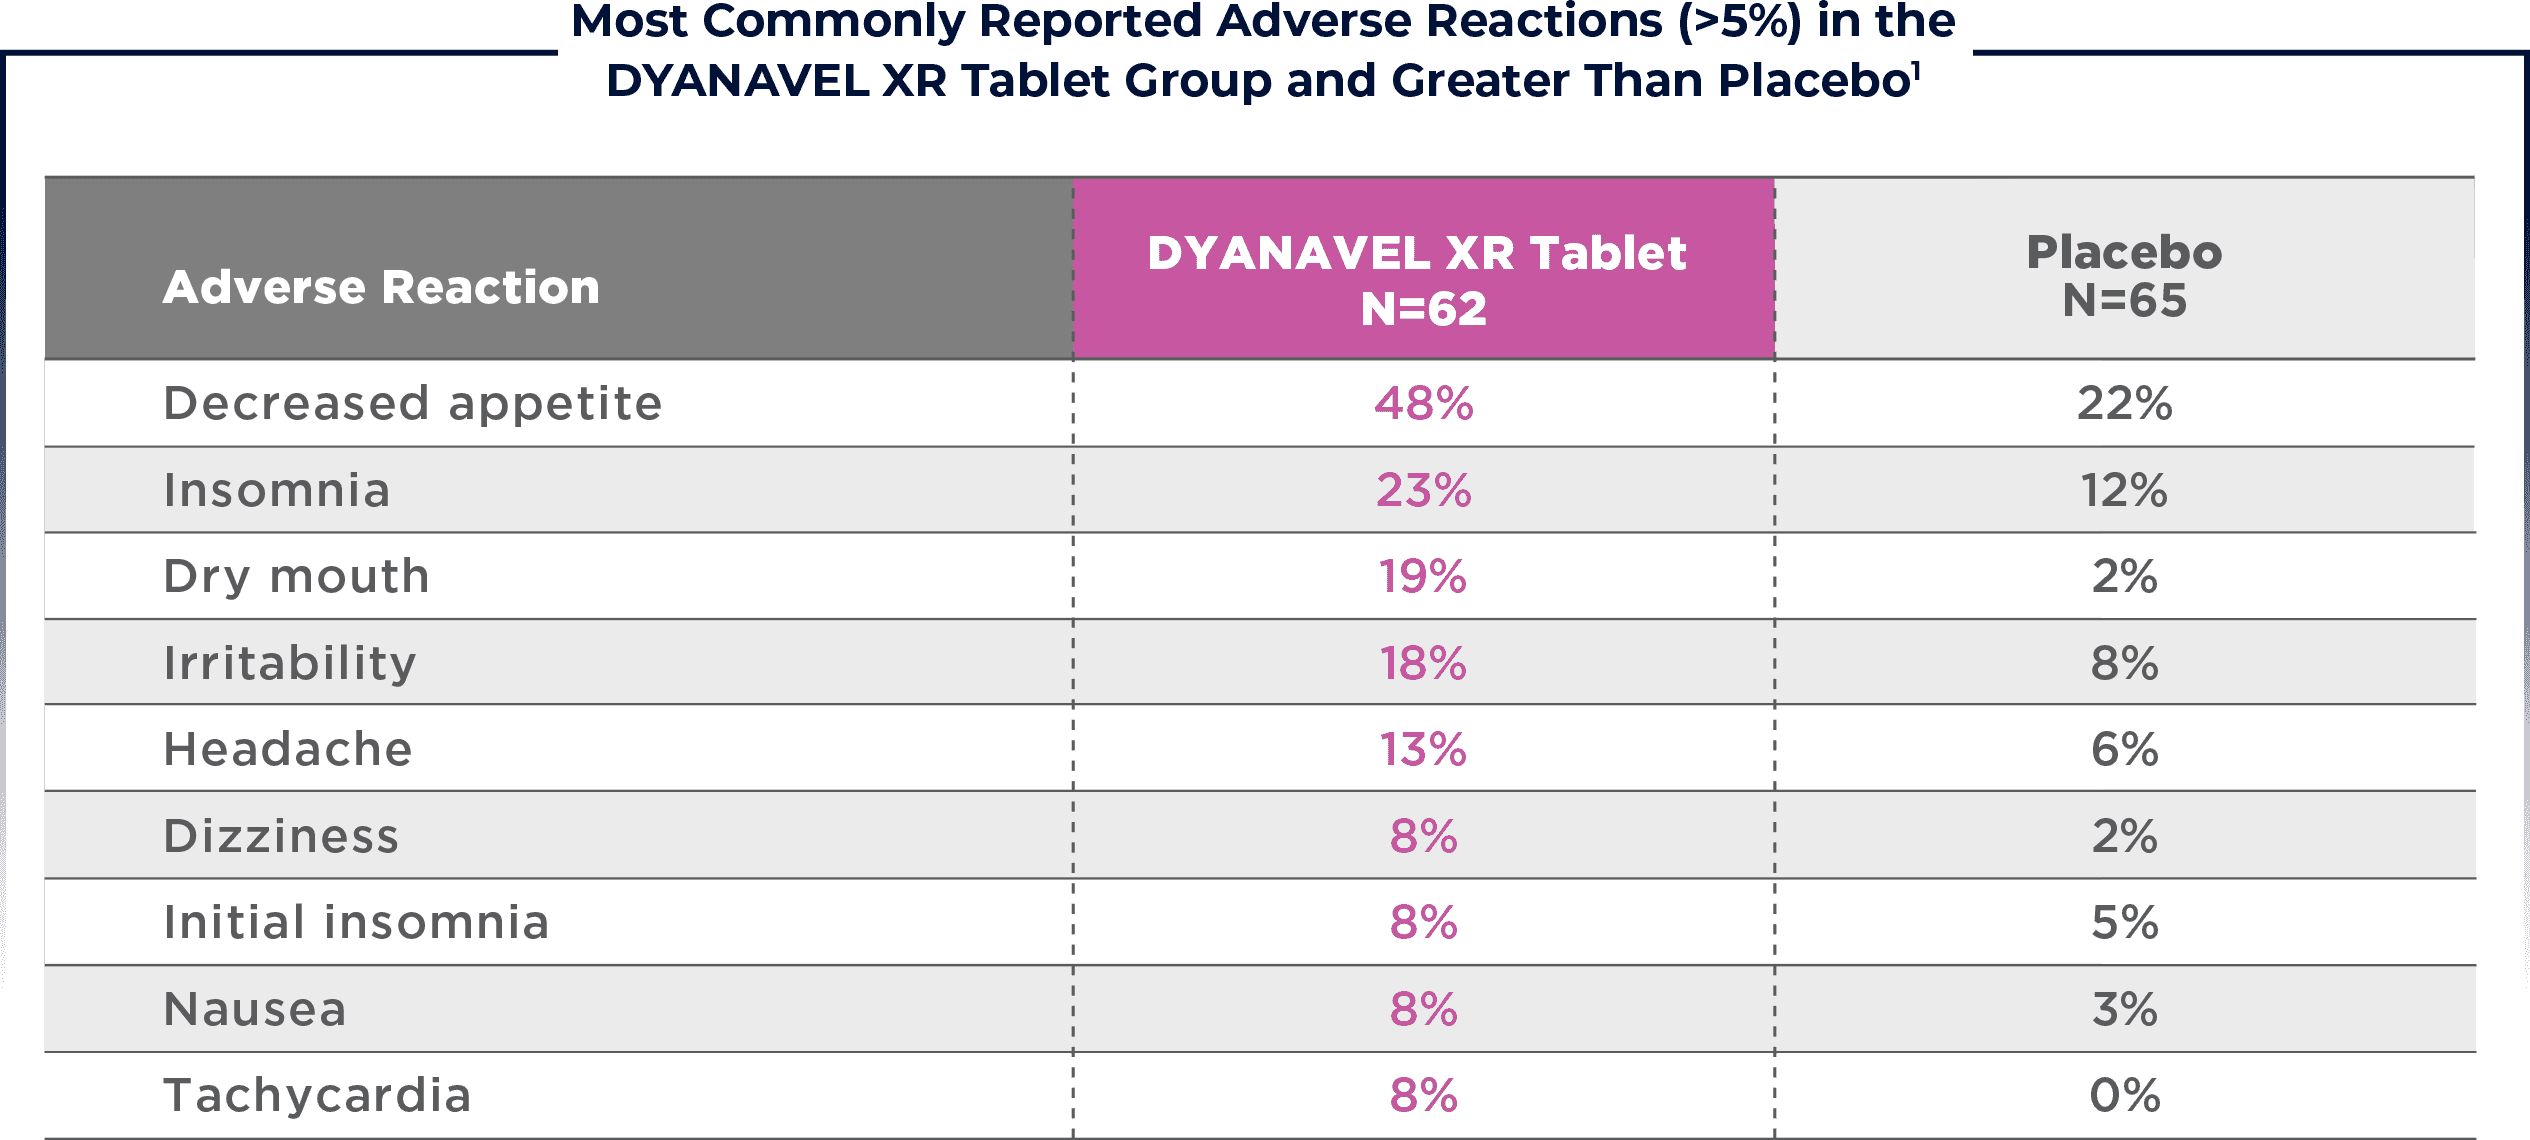 Table: Most Commonly Reported Adverse Reactions (>5%) In The DYANAVEL XR Tablet Group and Greater Than Placebo